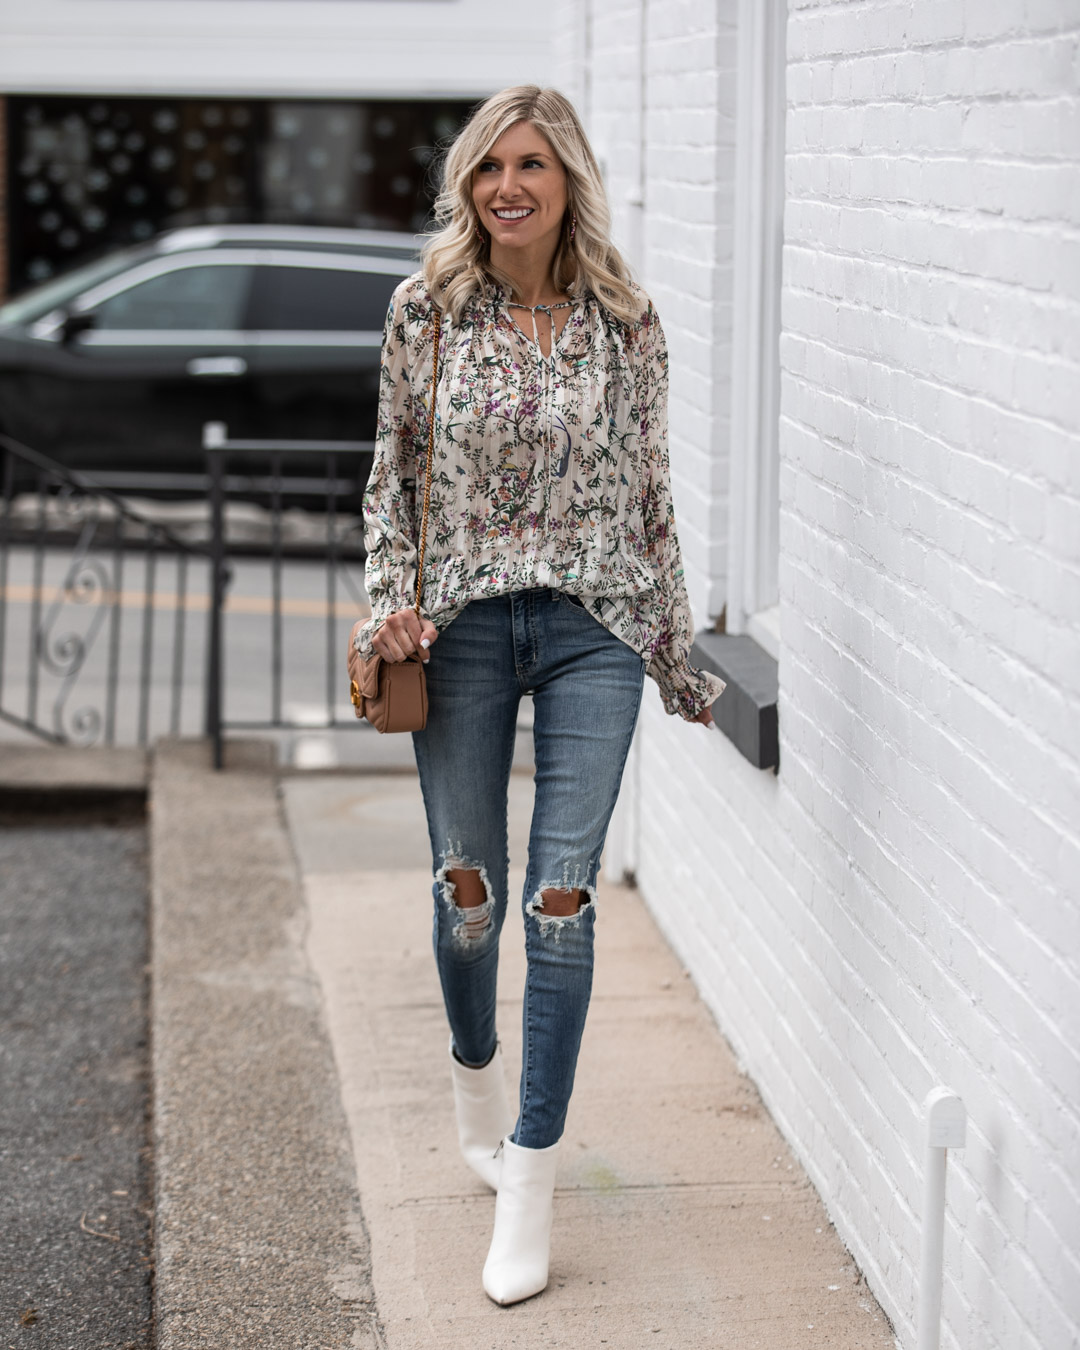 Floral Top for Spring